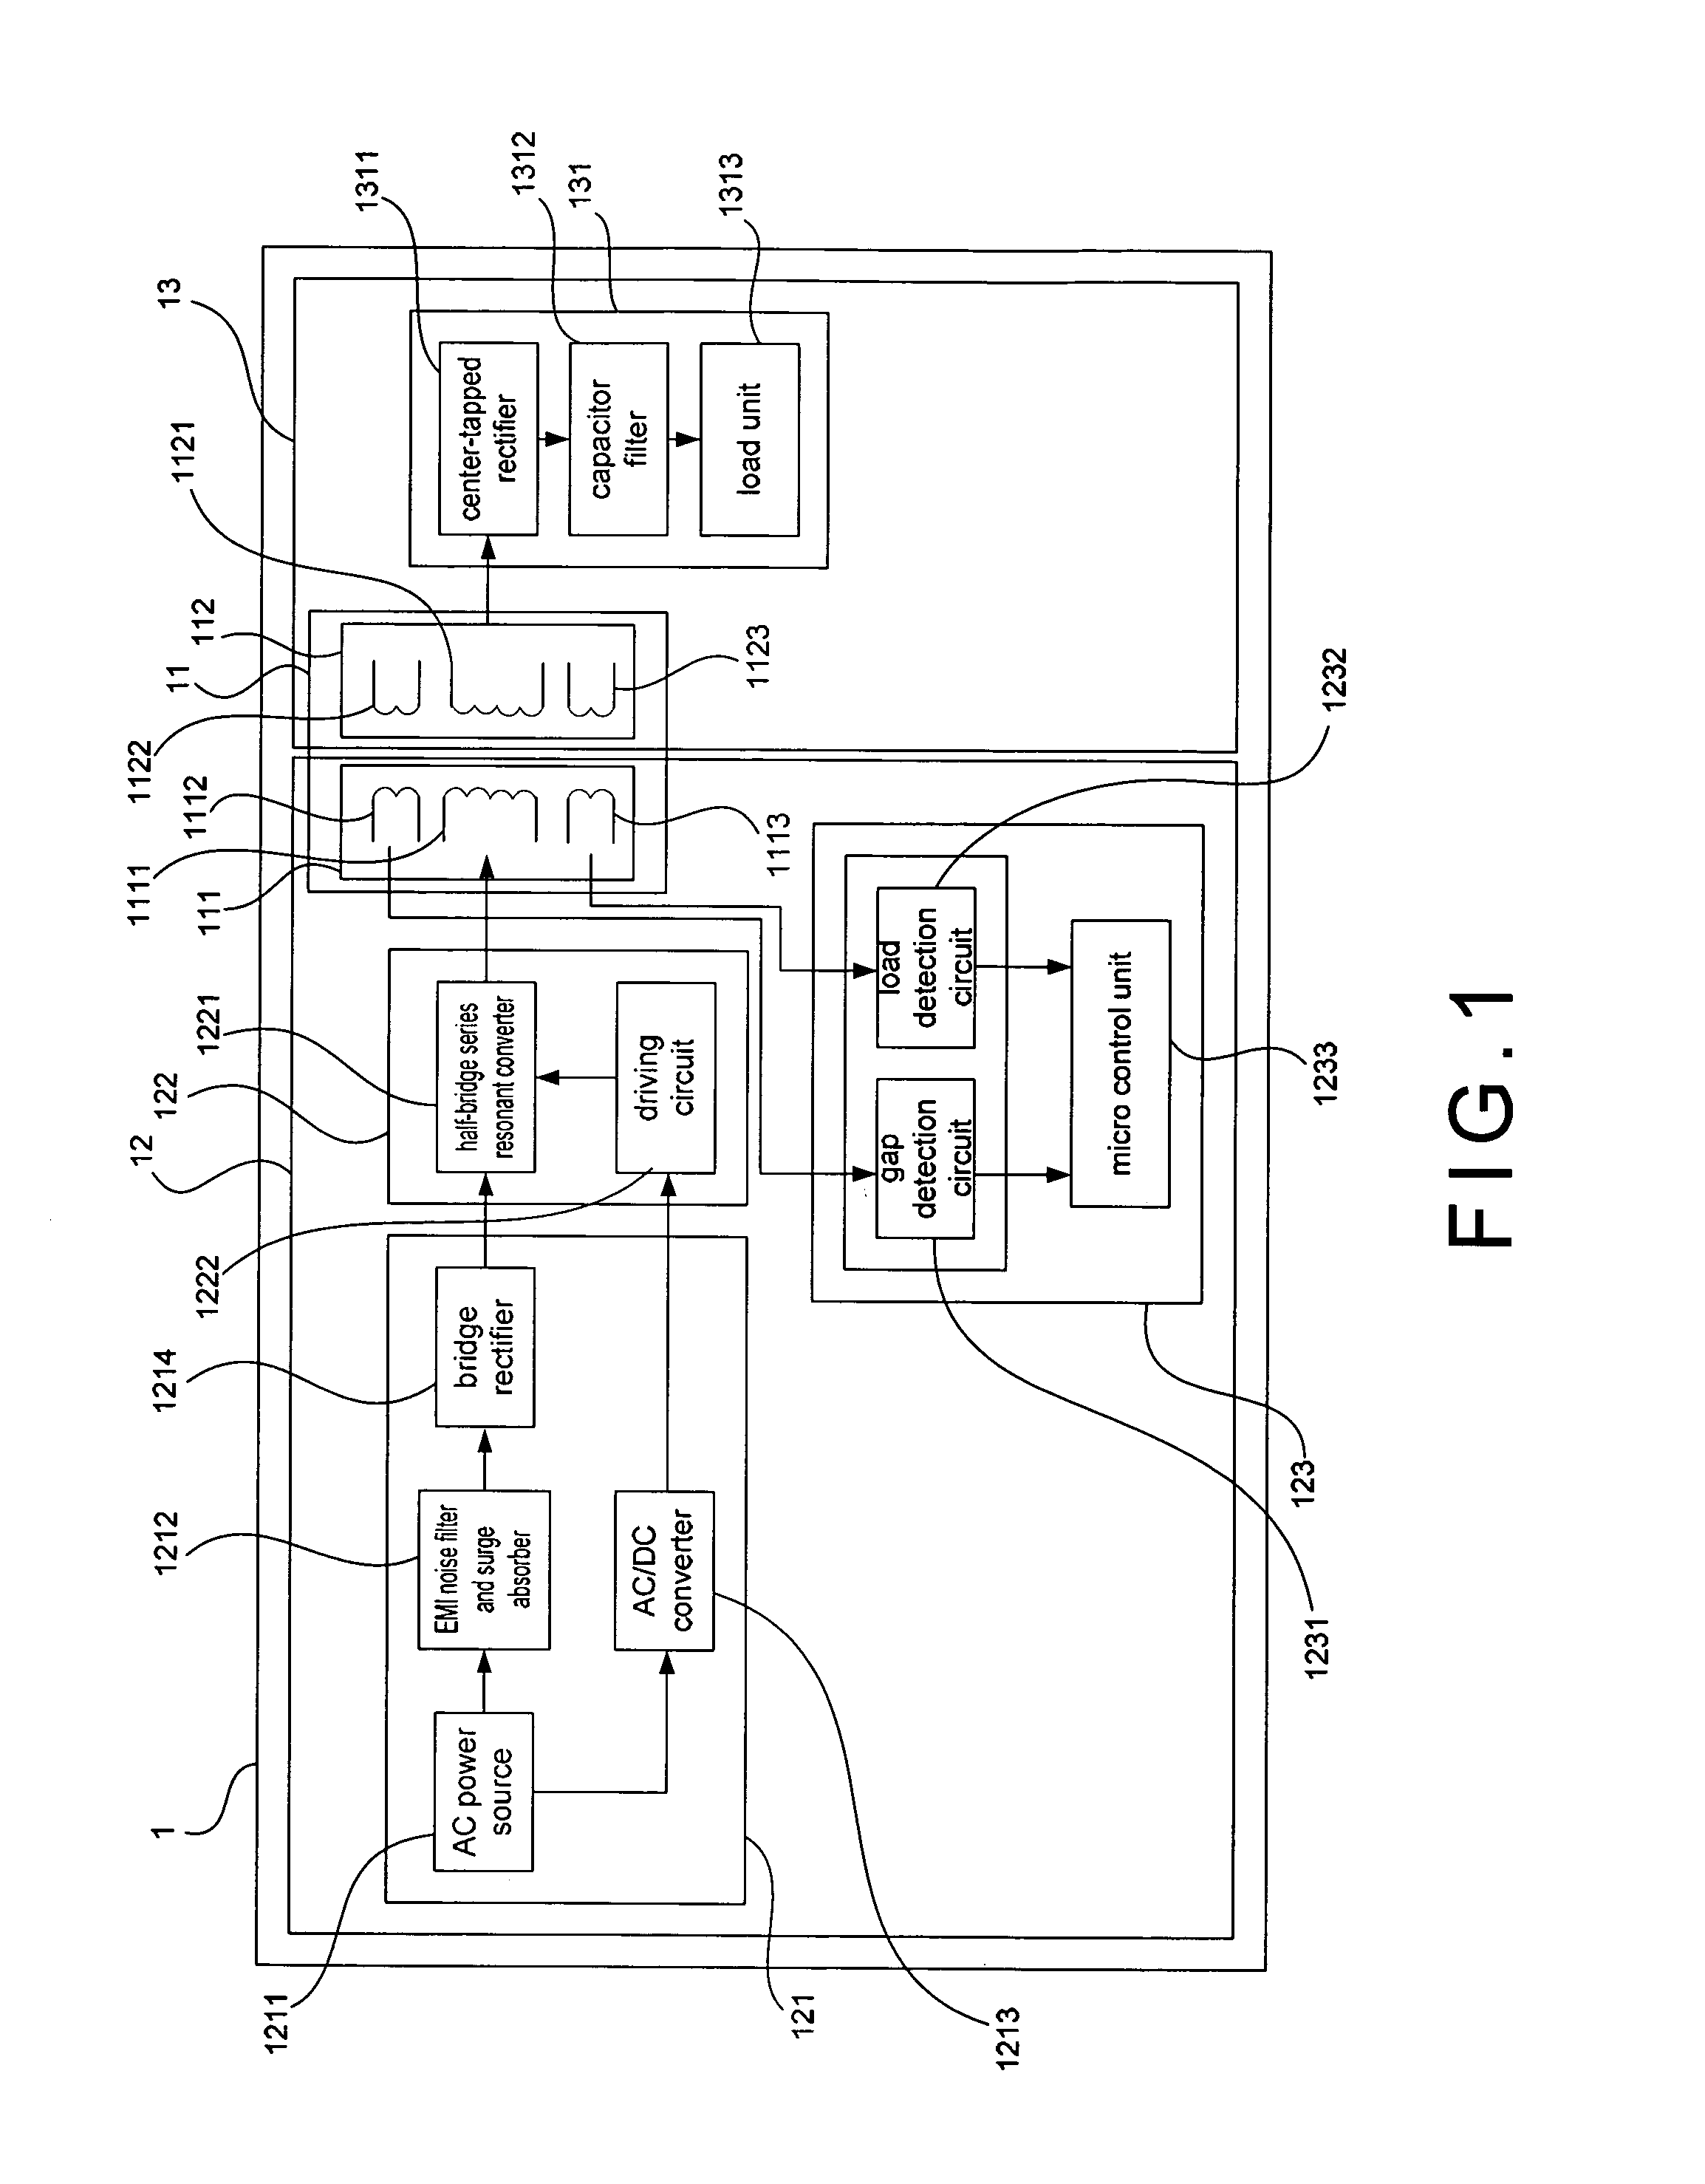 Non-contact power system with load and gap detection